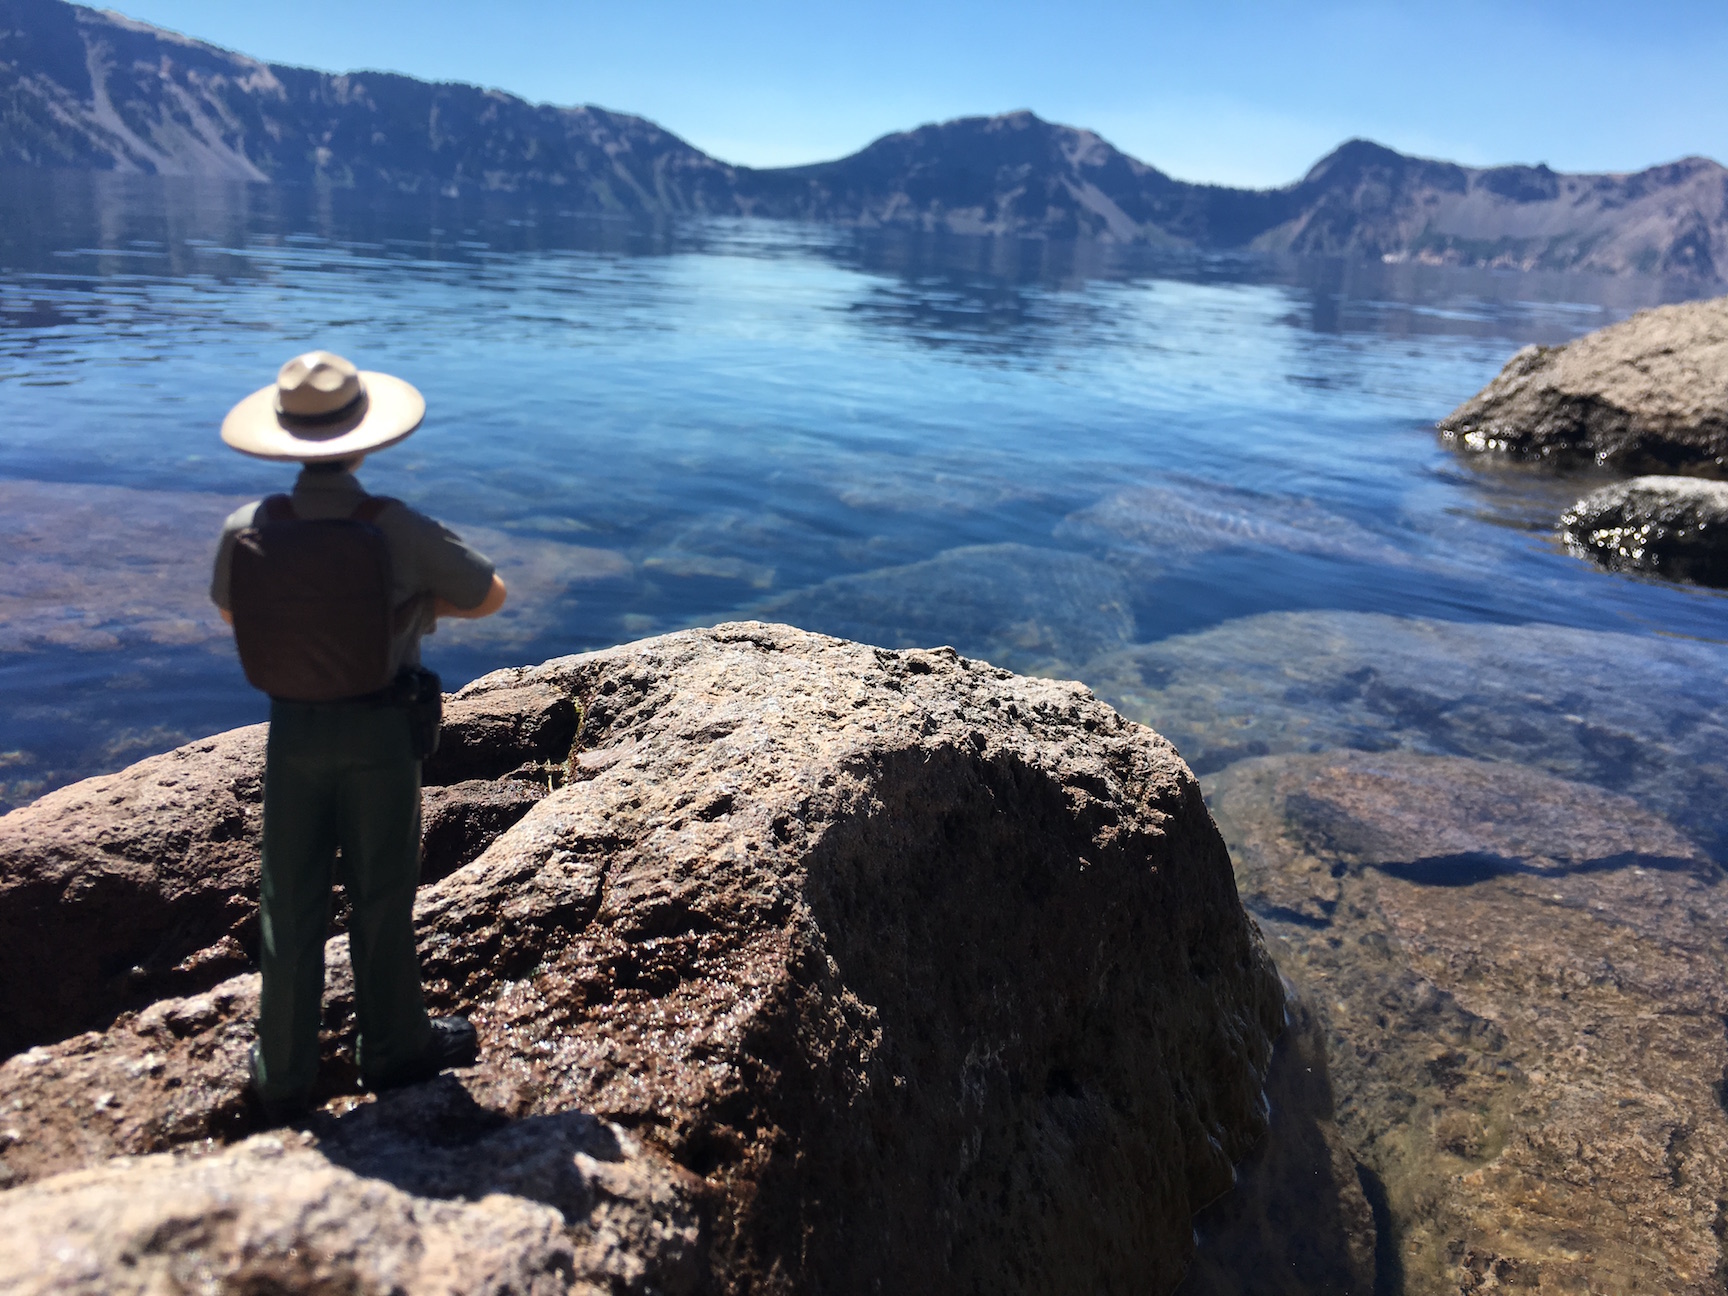 "Nate Parker" takes in the view at Crater Lake National Park